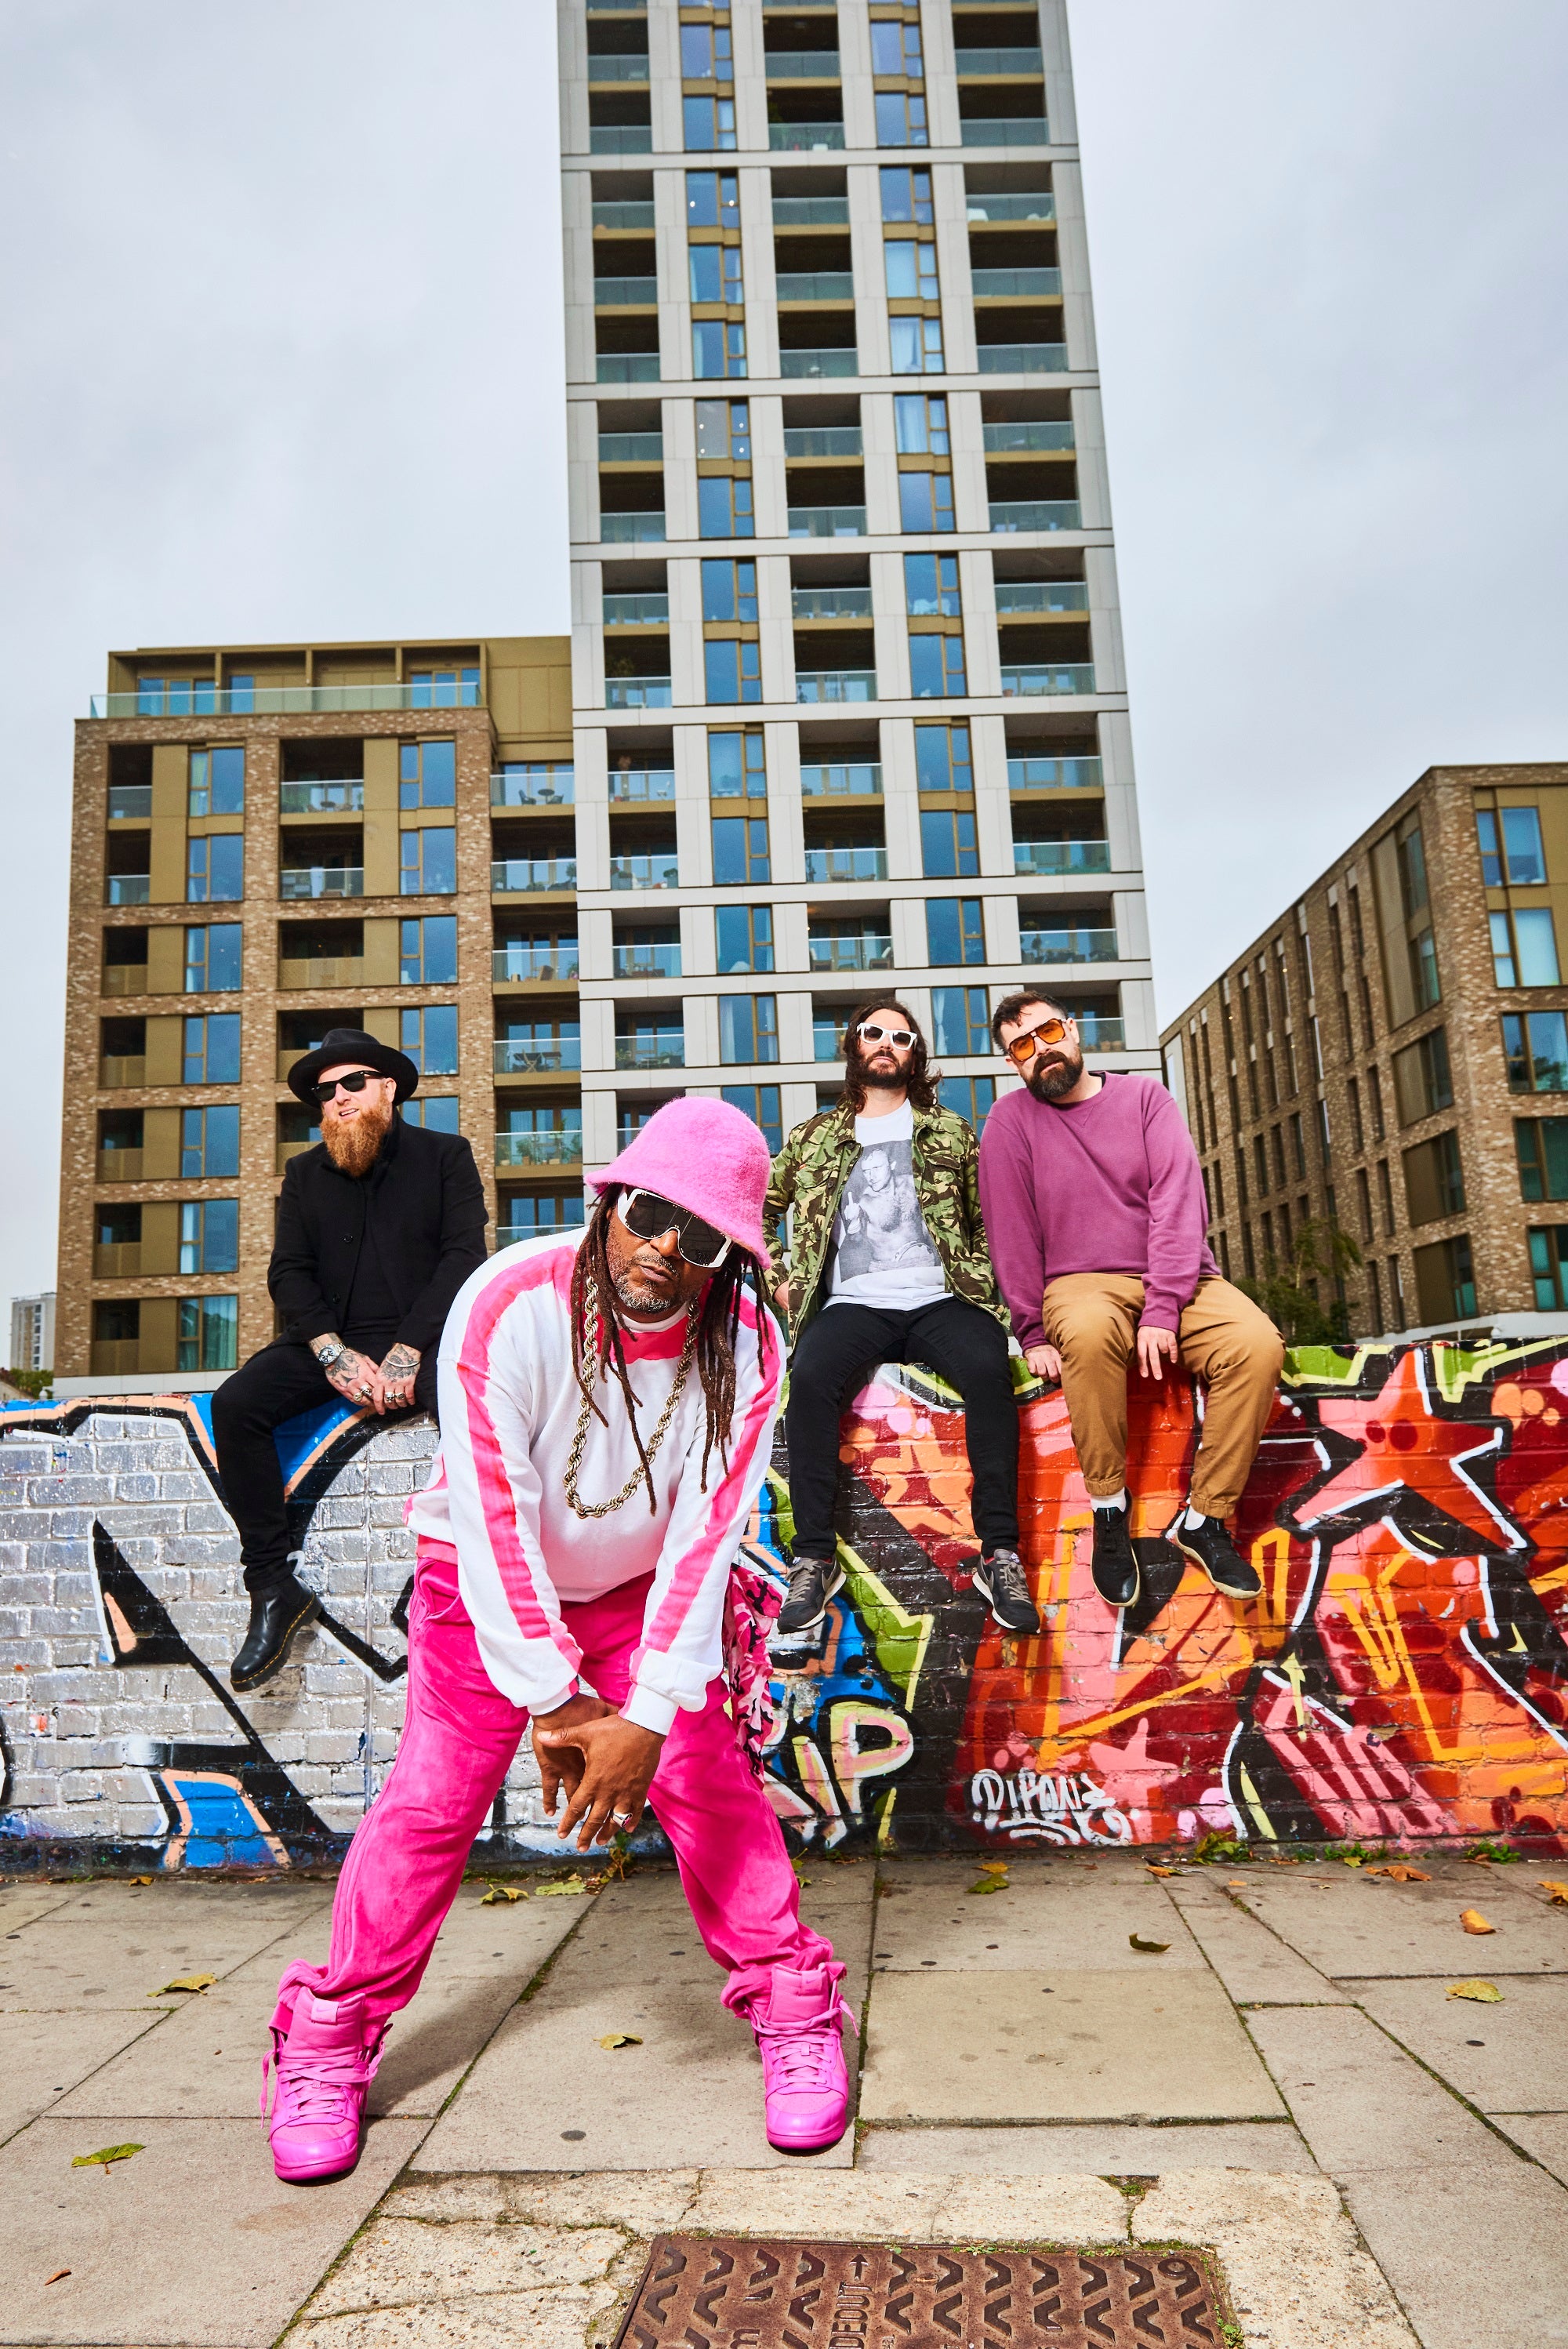 Skindred in Oxford promo photo for Priority from O2 presale offer code